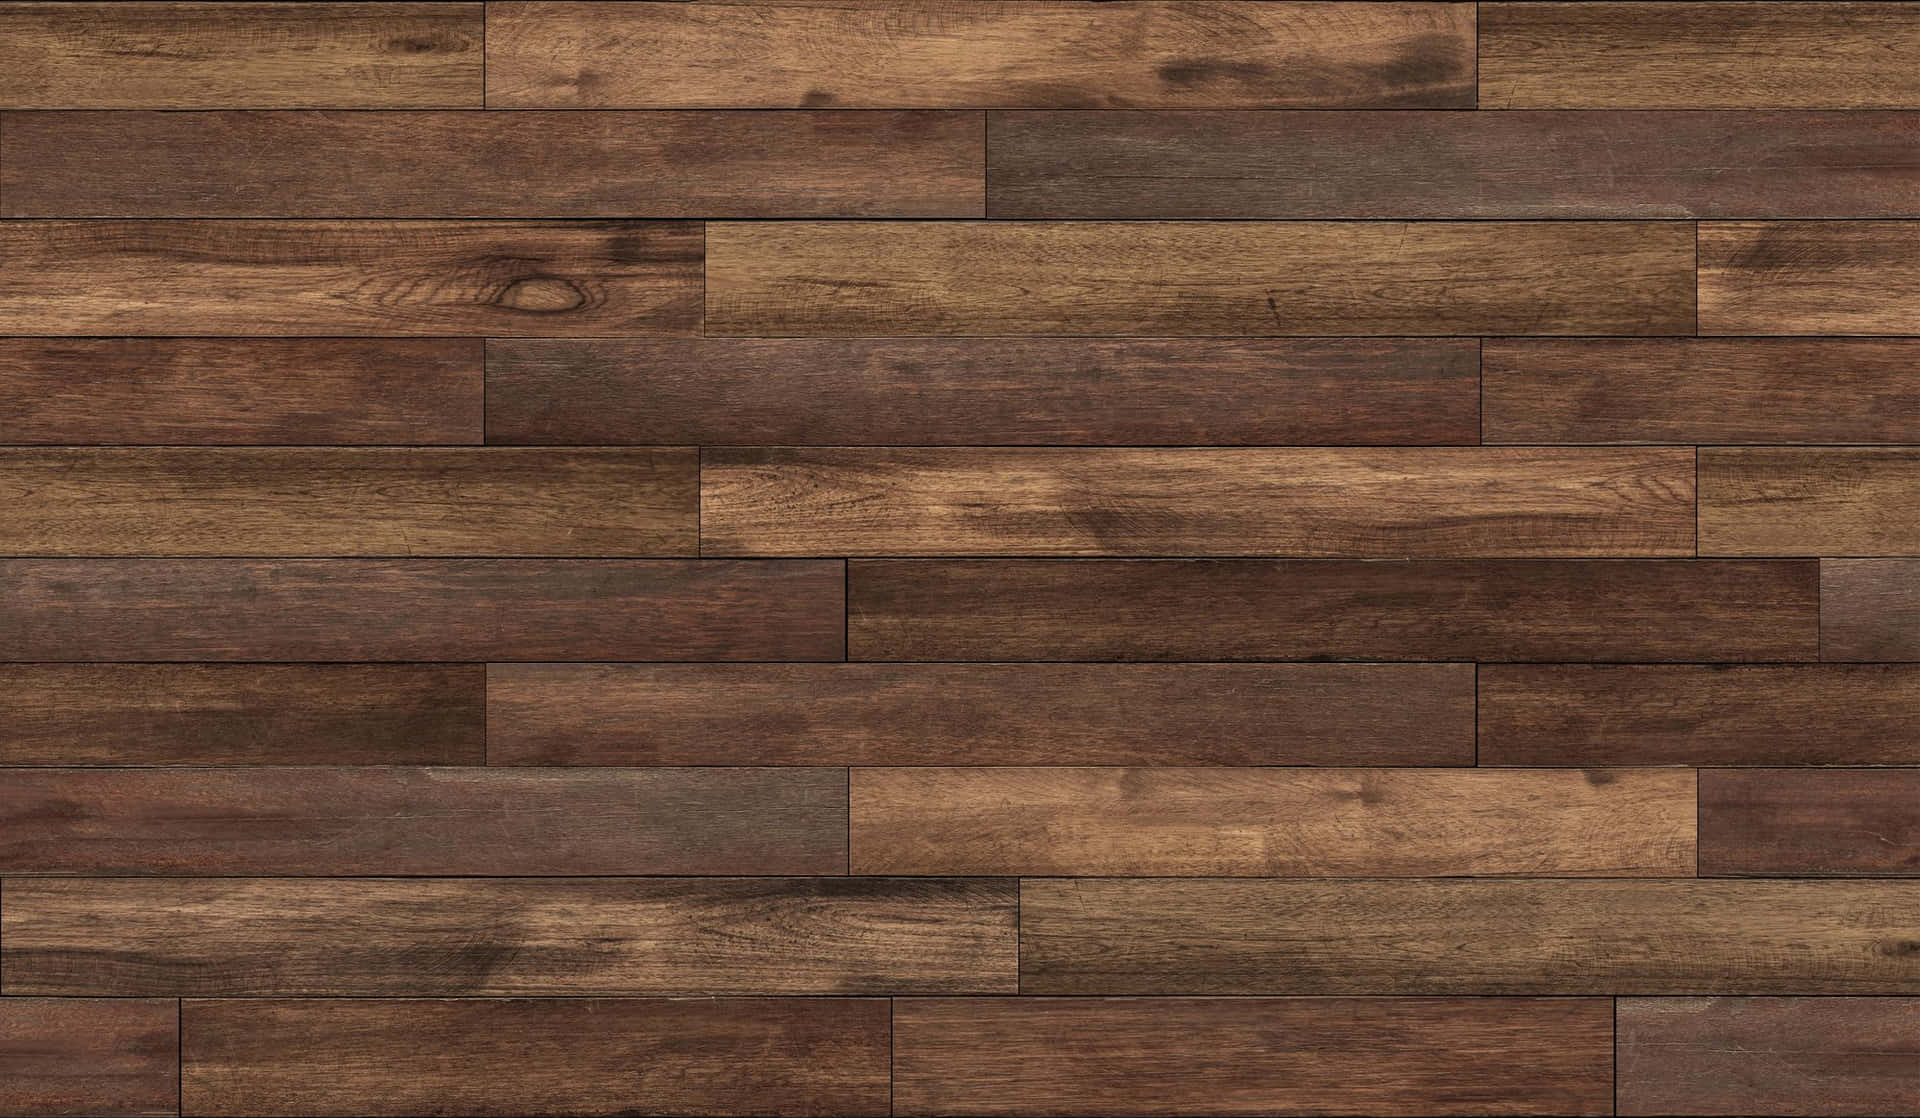 Enhance Your Home's Look with Wood Flooring